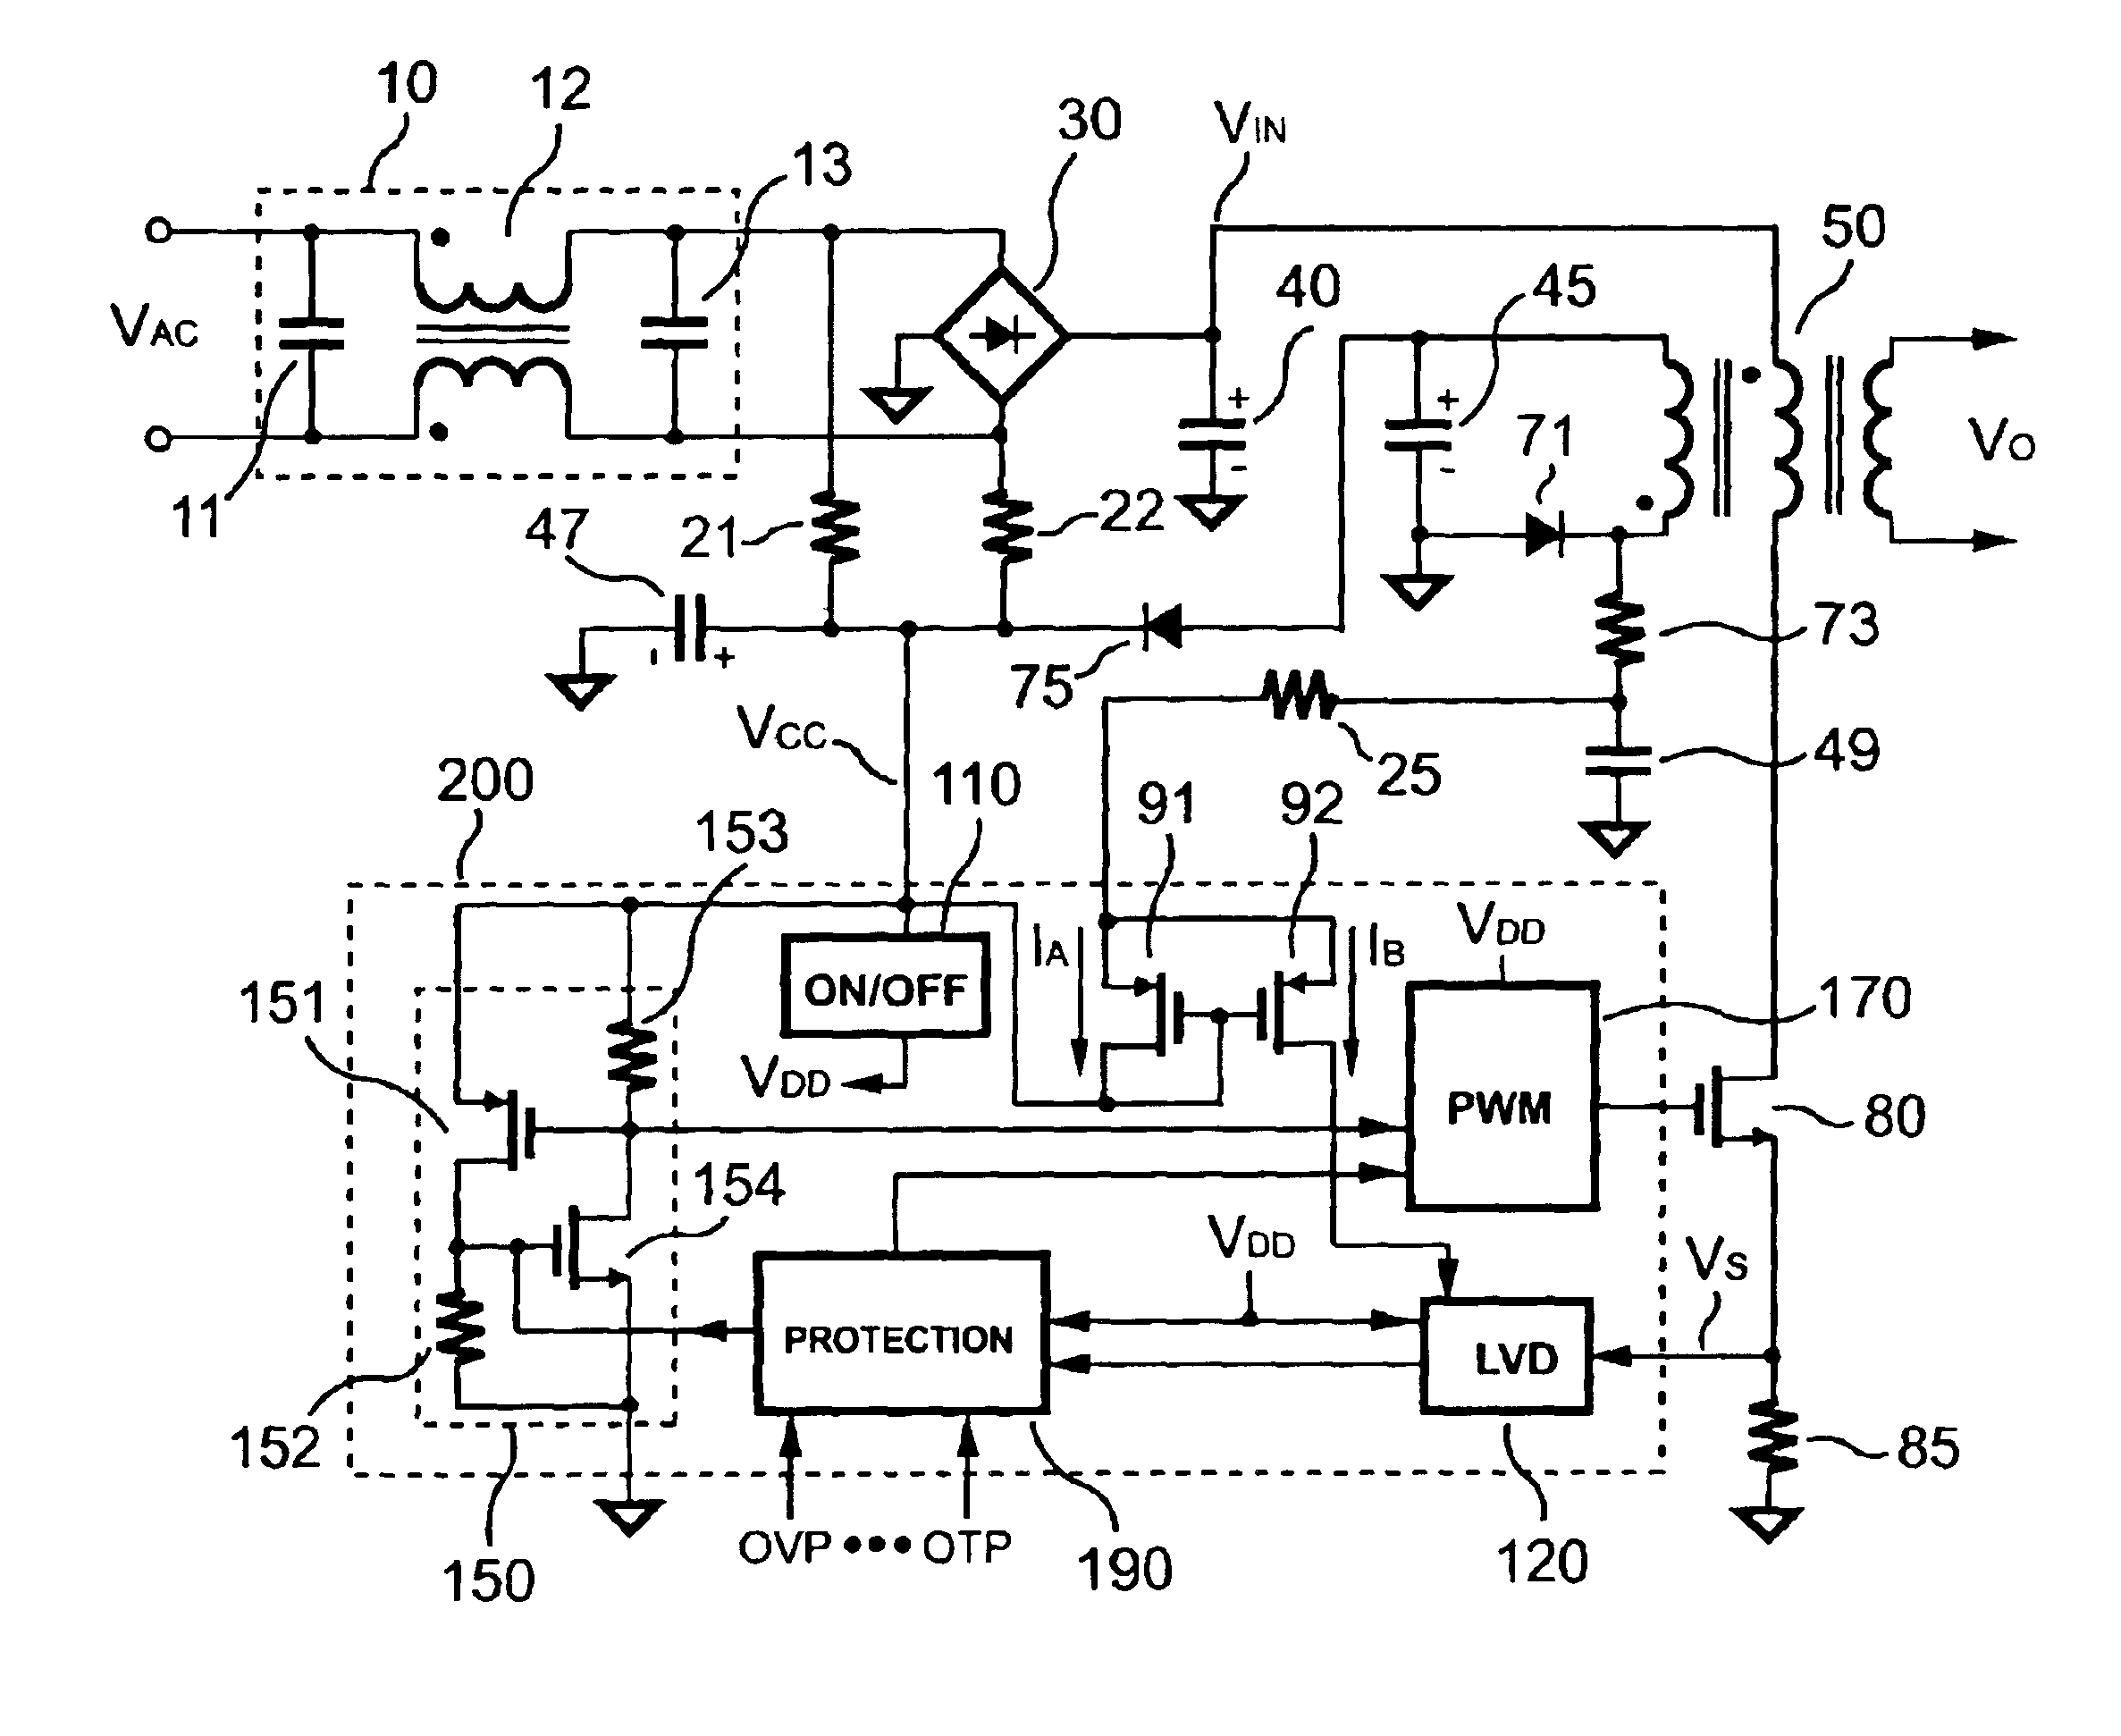 Integrated start-up circuit with reduced power consumption